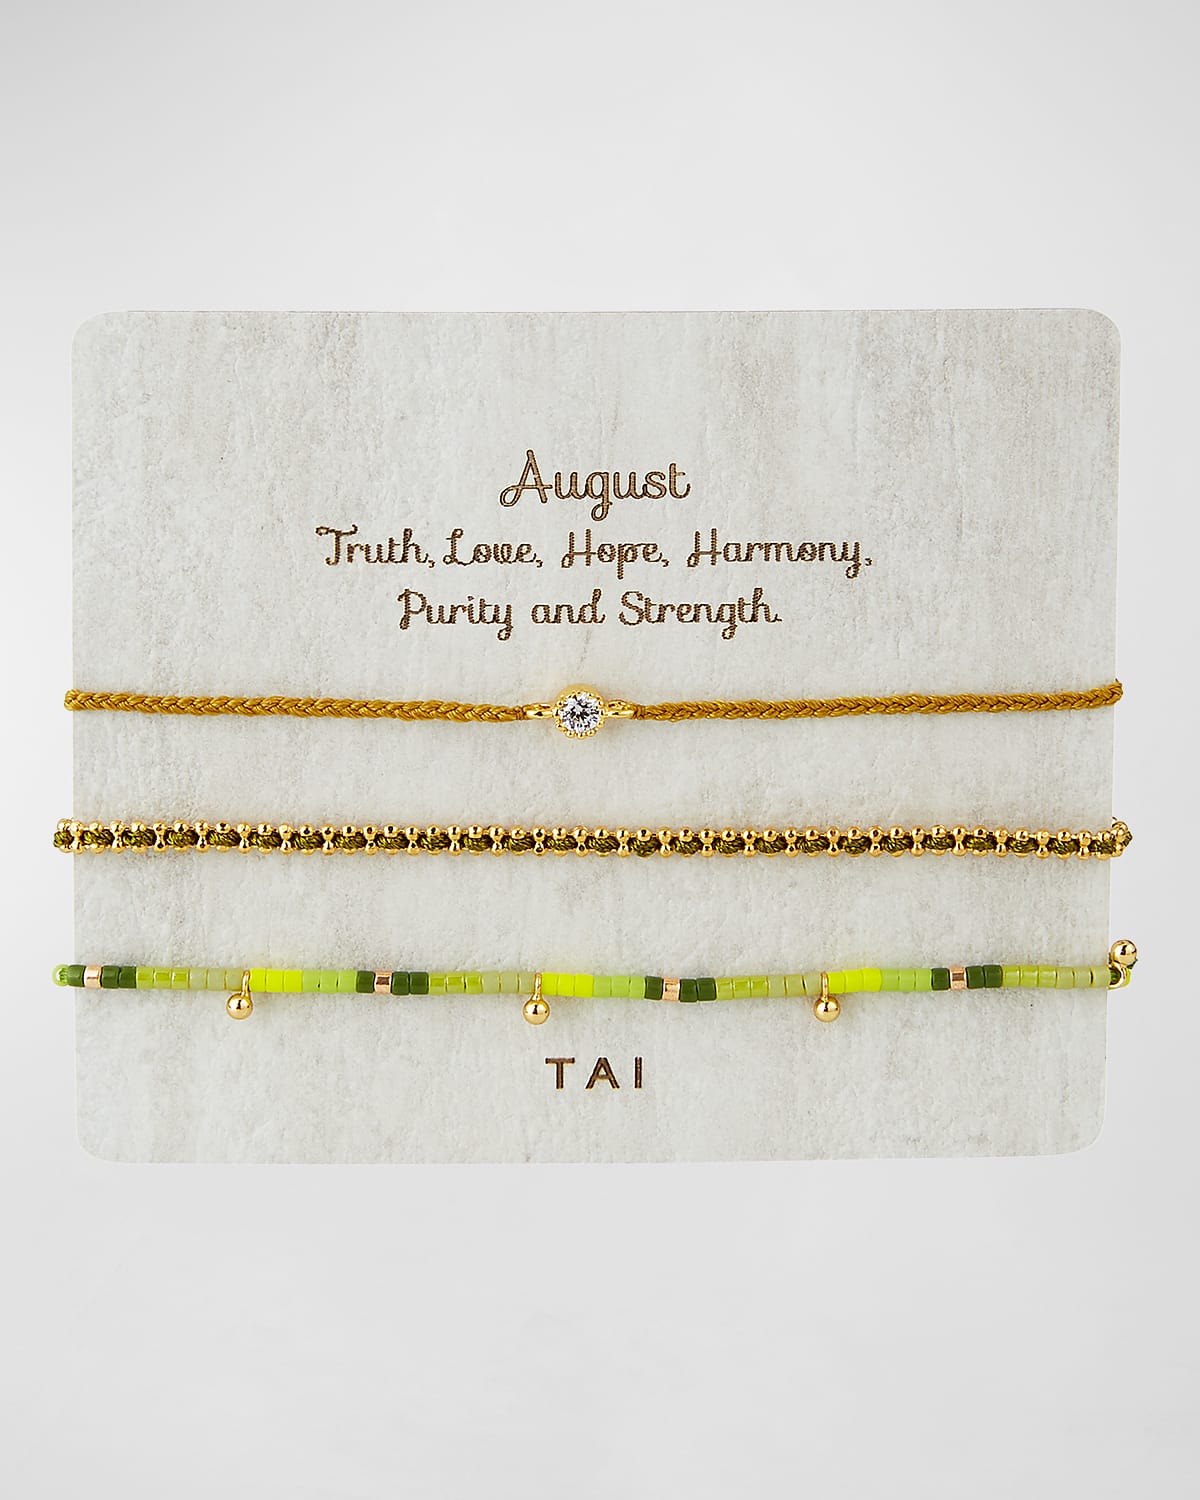 Tai Personalized Birthday Bracelets, Set Of 3 In August